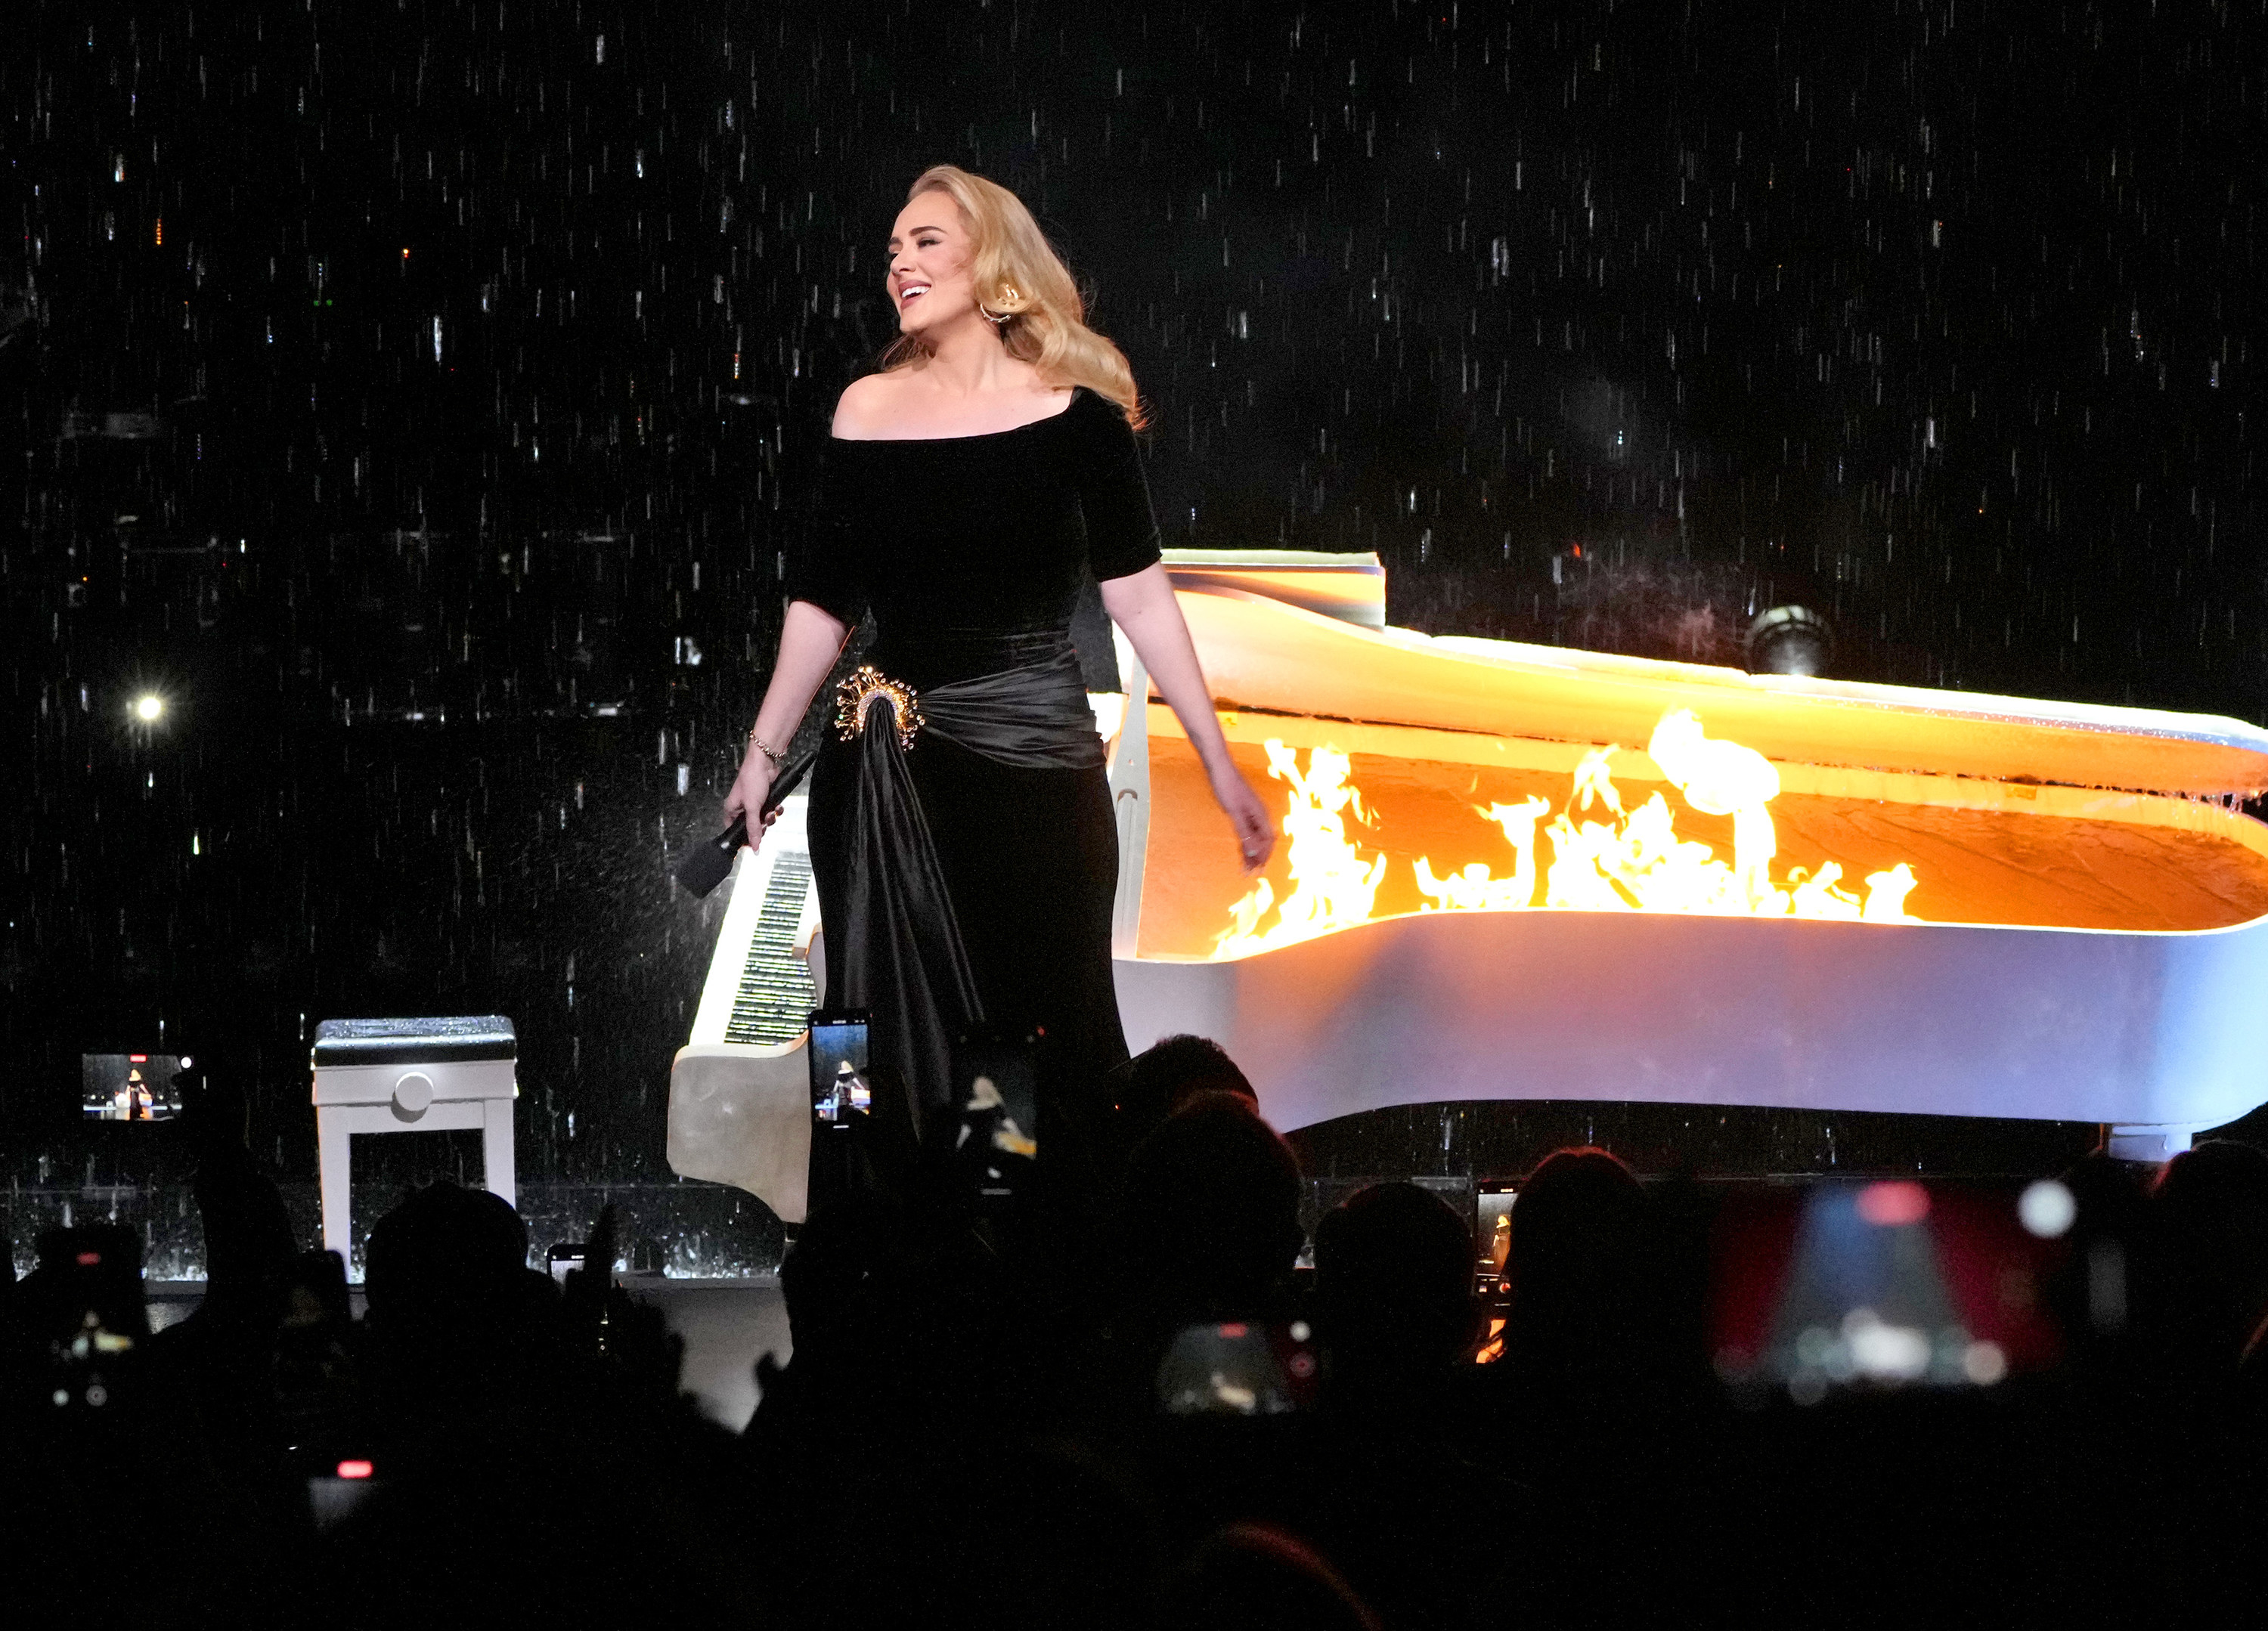 Adele in front of a flaming piano